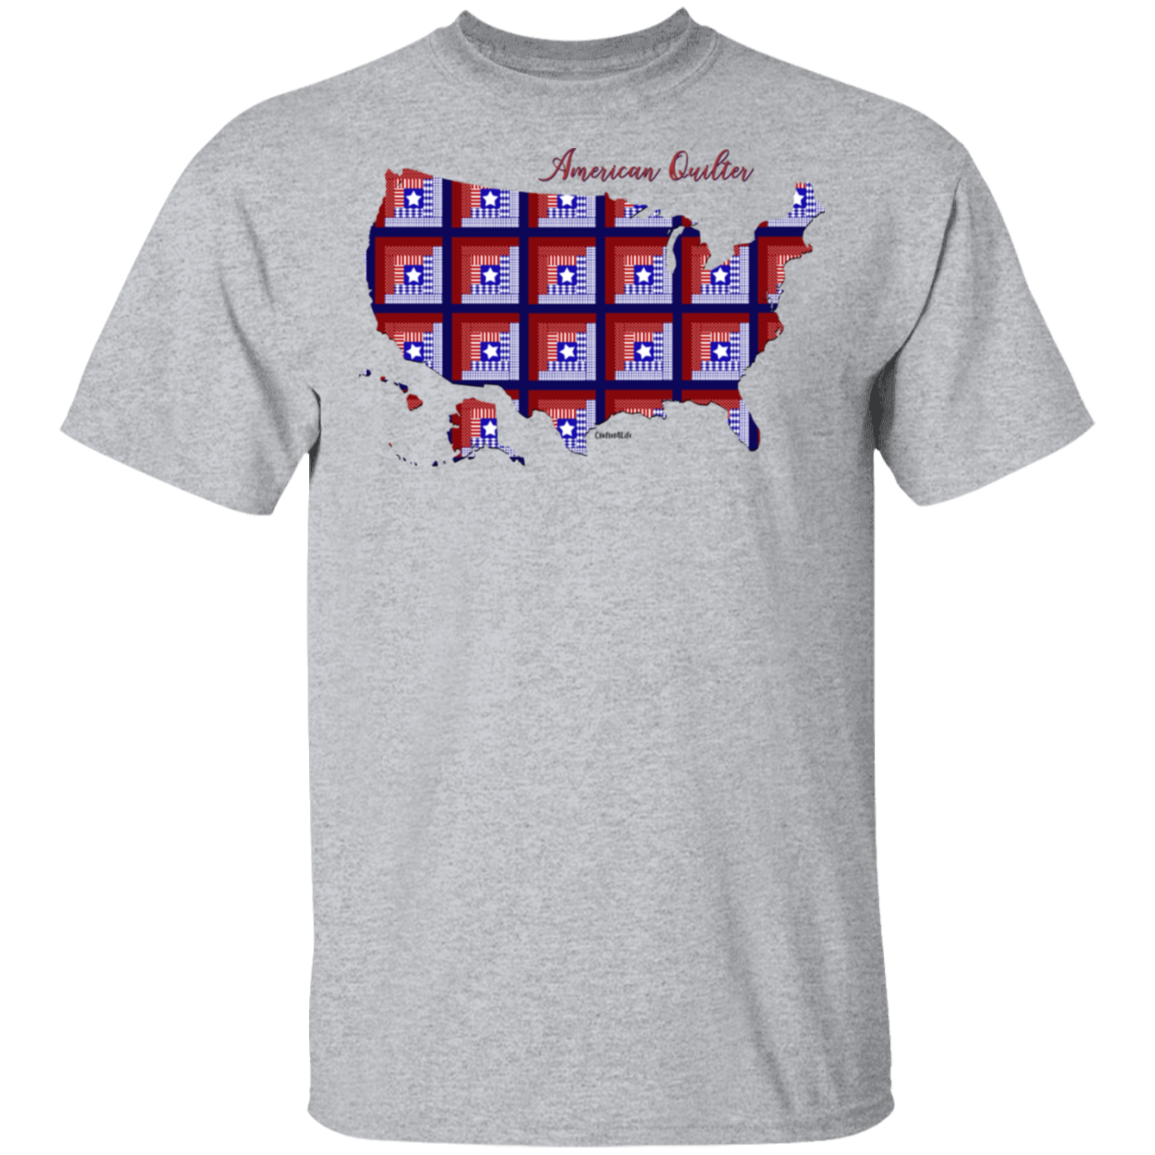 American Quilter T-Shirt